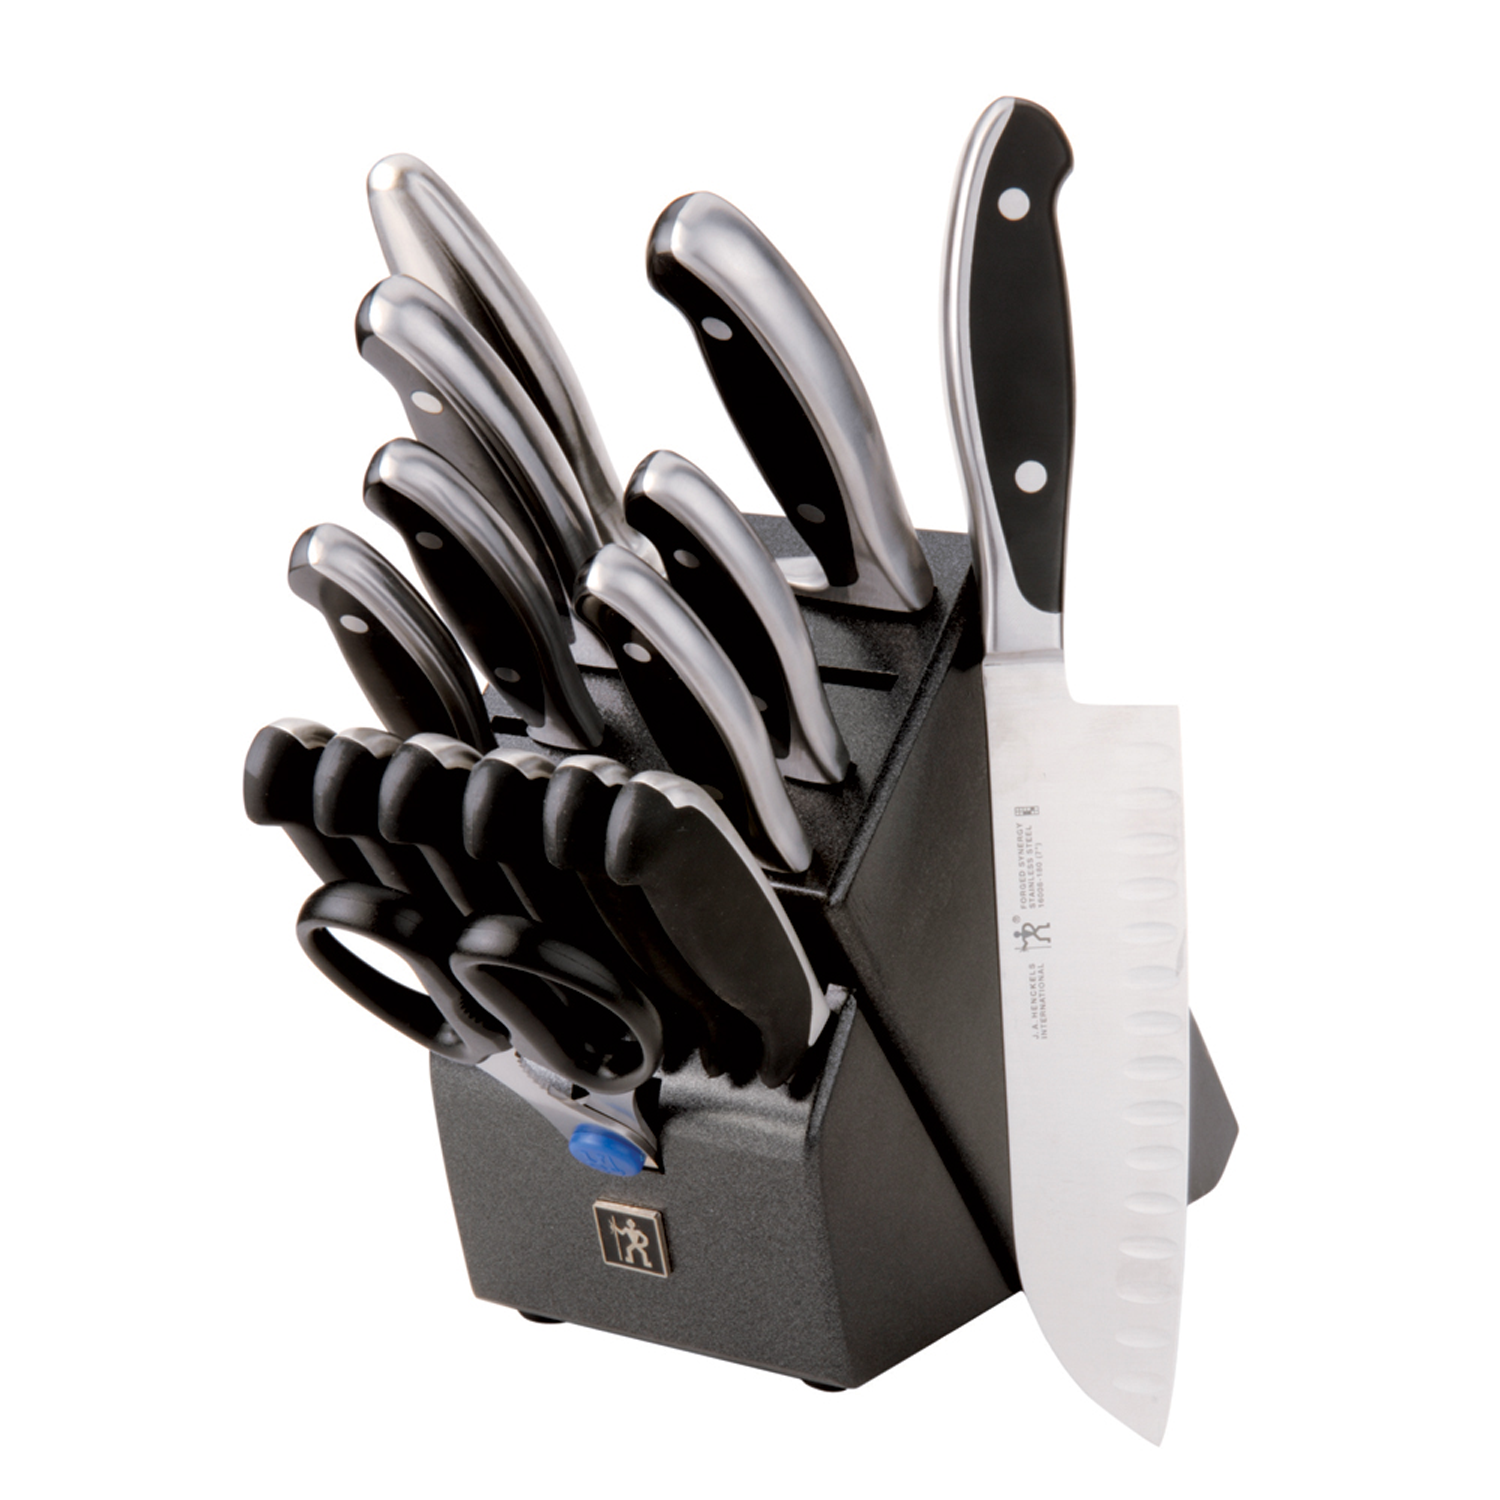 All-Clad Forged 7-Piece Knife Block Set